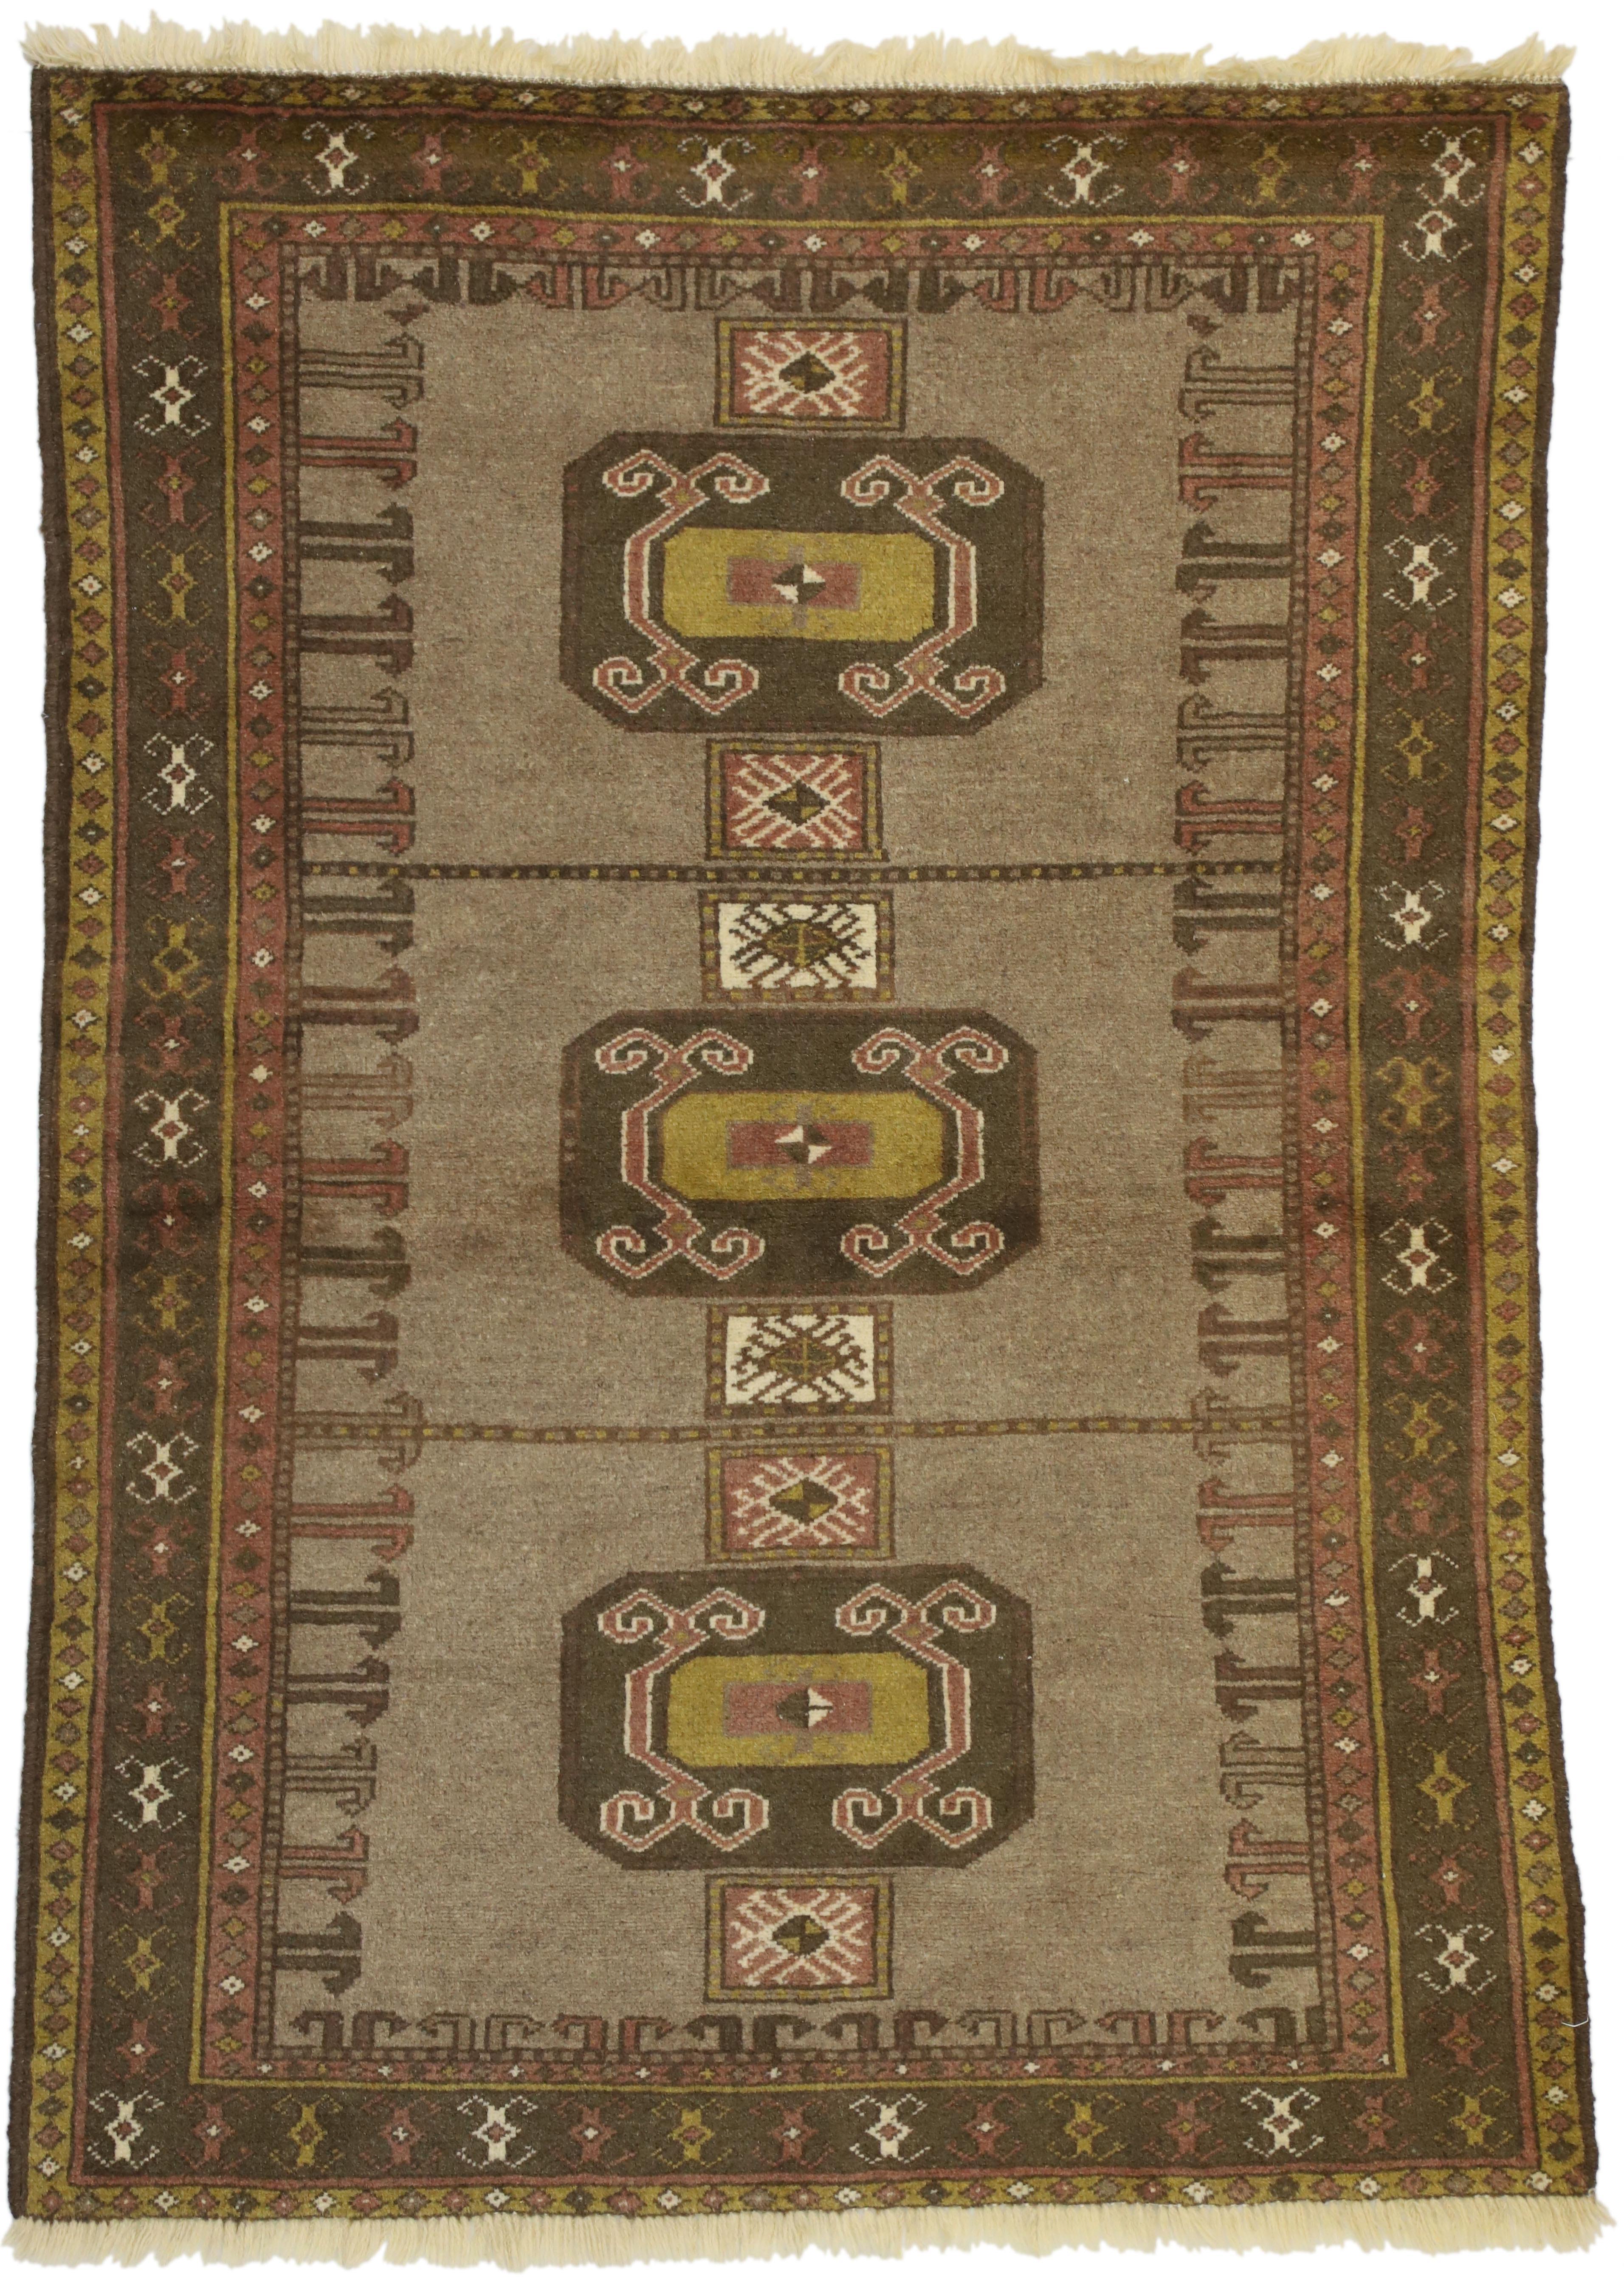 76402, Vintage Persian Shiraz Tribal Rug with Mid-Century Modern Style 04'00 x 05'06. This hand-knotted wool vintage Persian Shiraz rug with tribal style features three amulet style medallions filled with tribal motifs in an open abrashed field. It